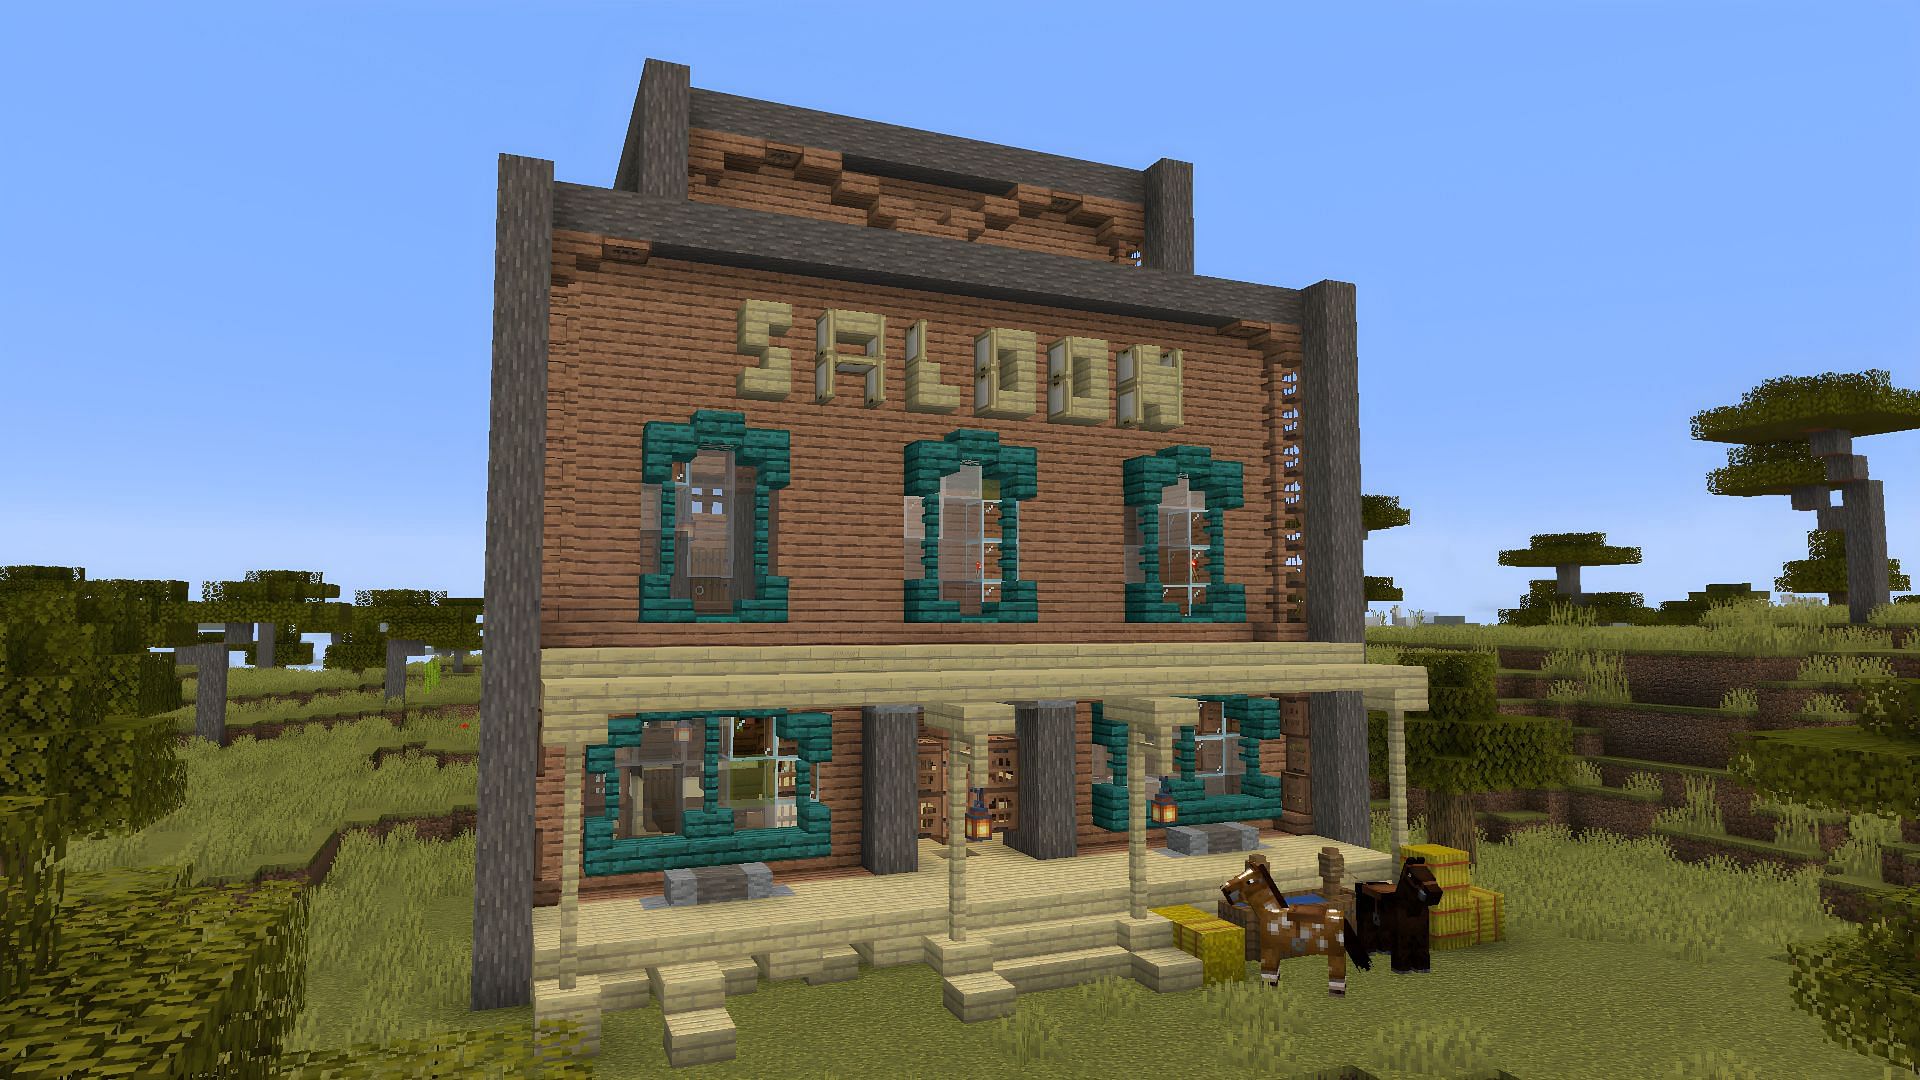 Saloon builds make for nice builds in Minecraft (Image via Reddit/u/LateNightSquad)